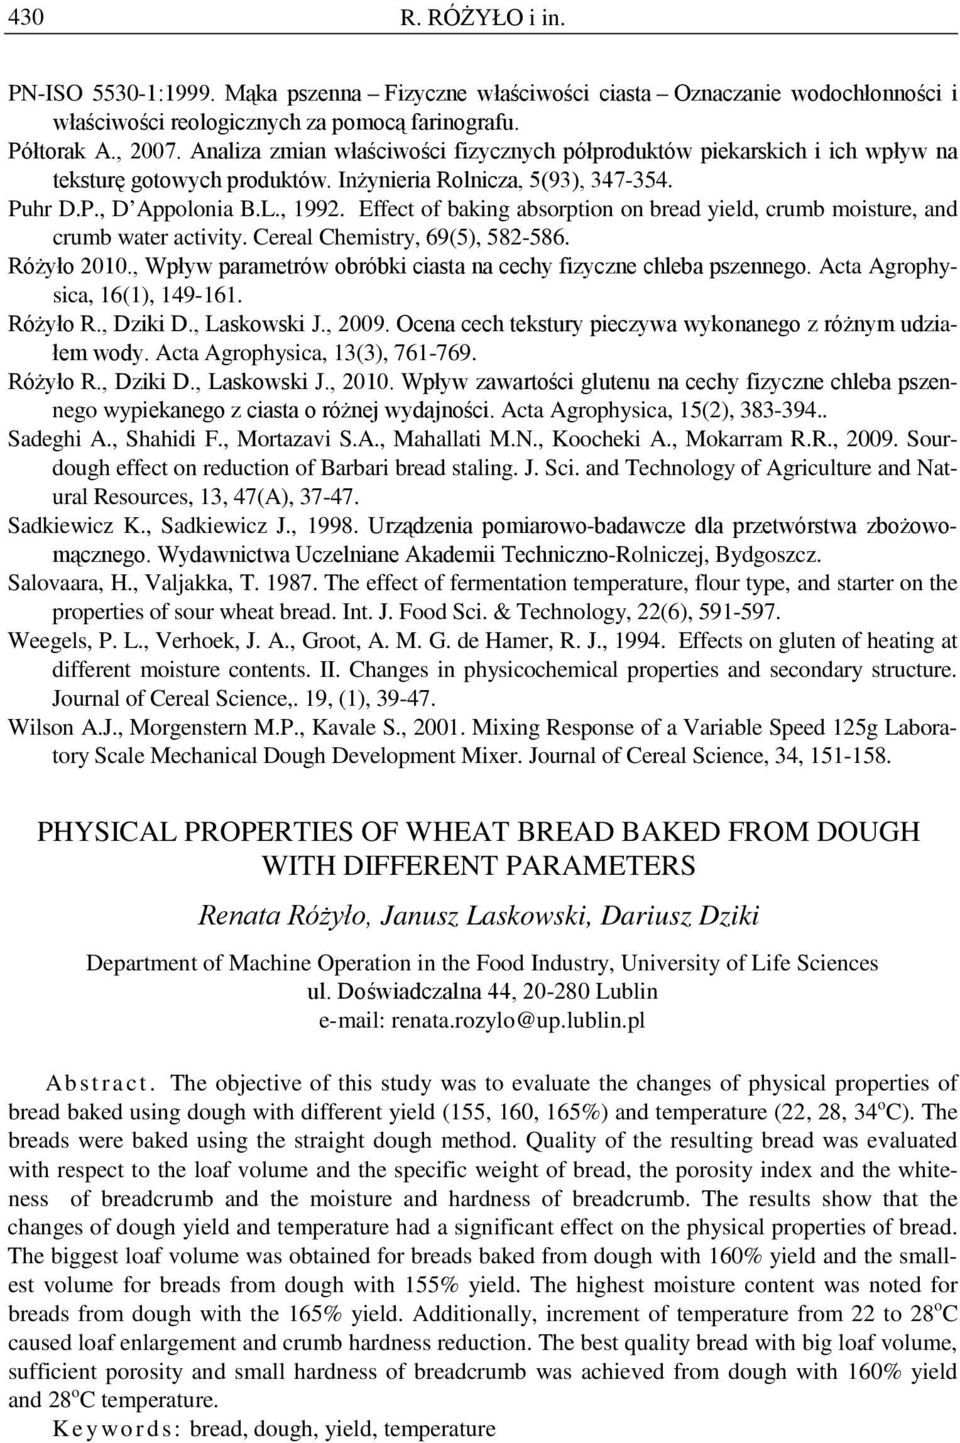 Effect of baking absorption on bread yield, crumb moisture, and crumb water activity. Cereal Chemistry, 69(5), 582-586. Różyło 2010.